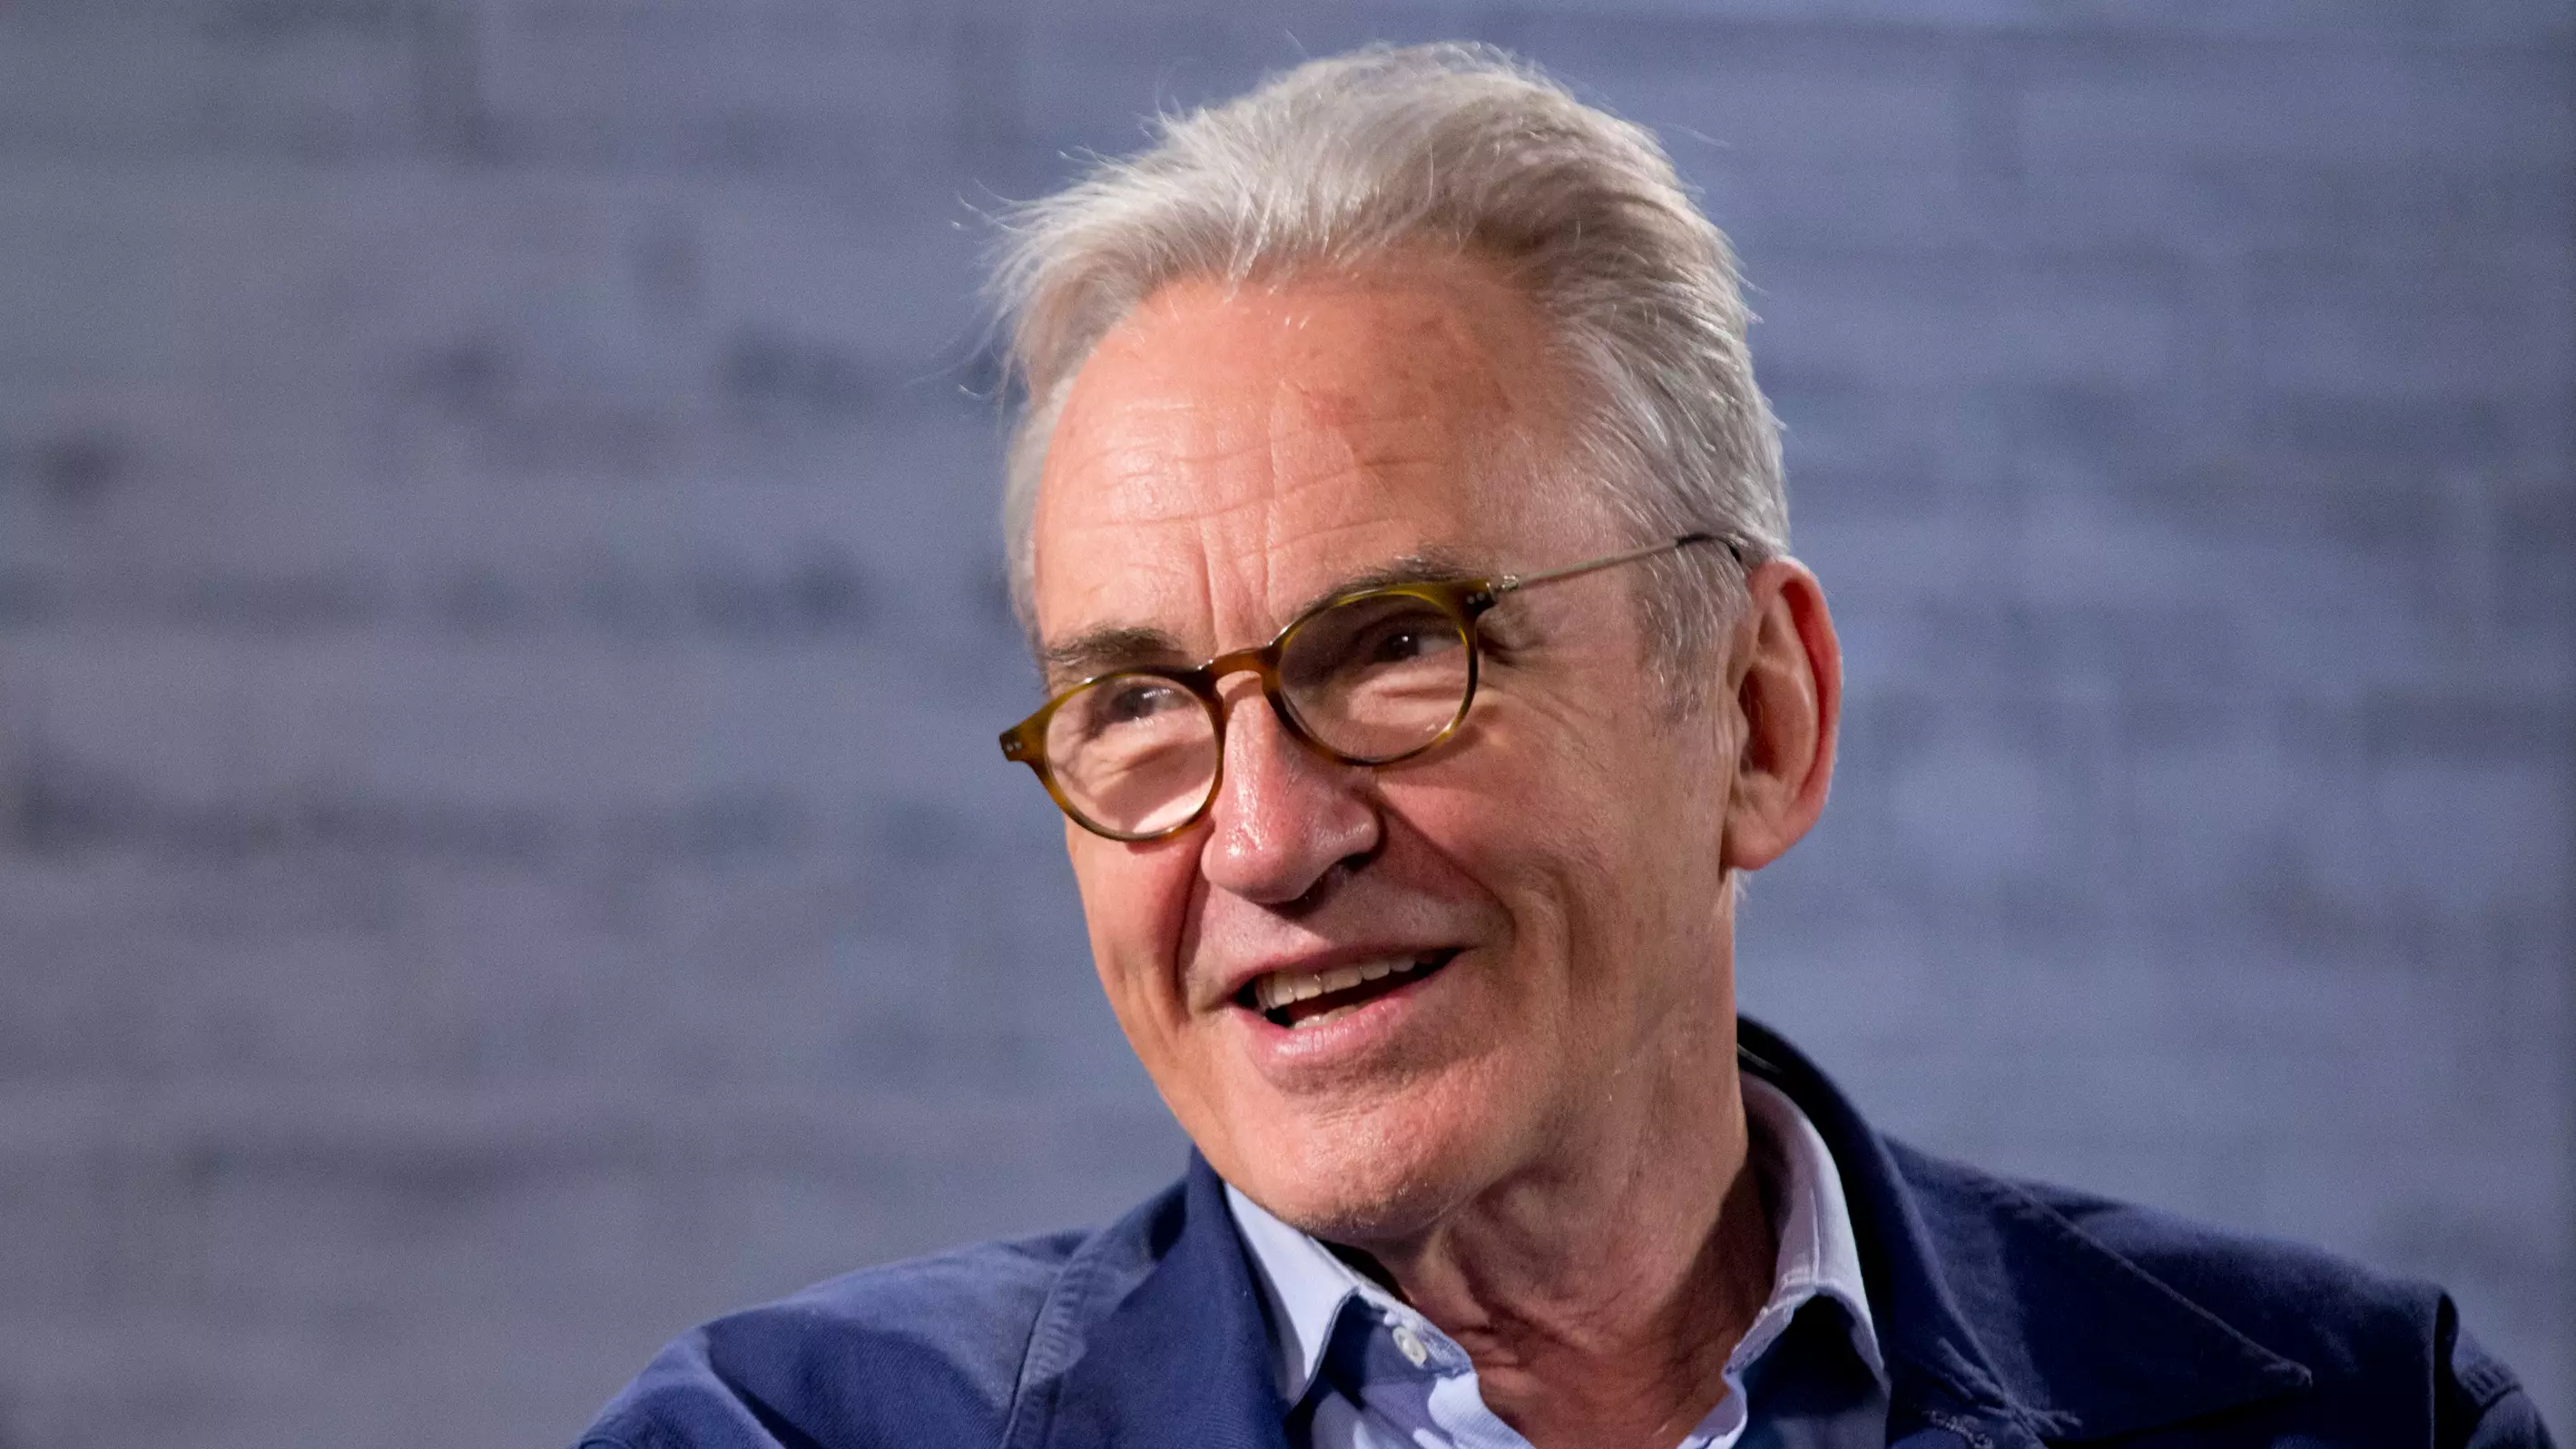 Larry Lamb has also confirmed he will return (